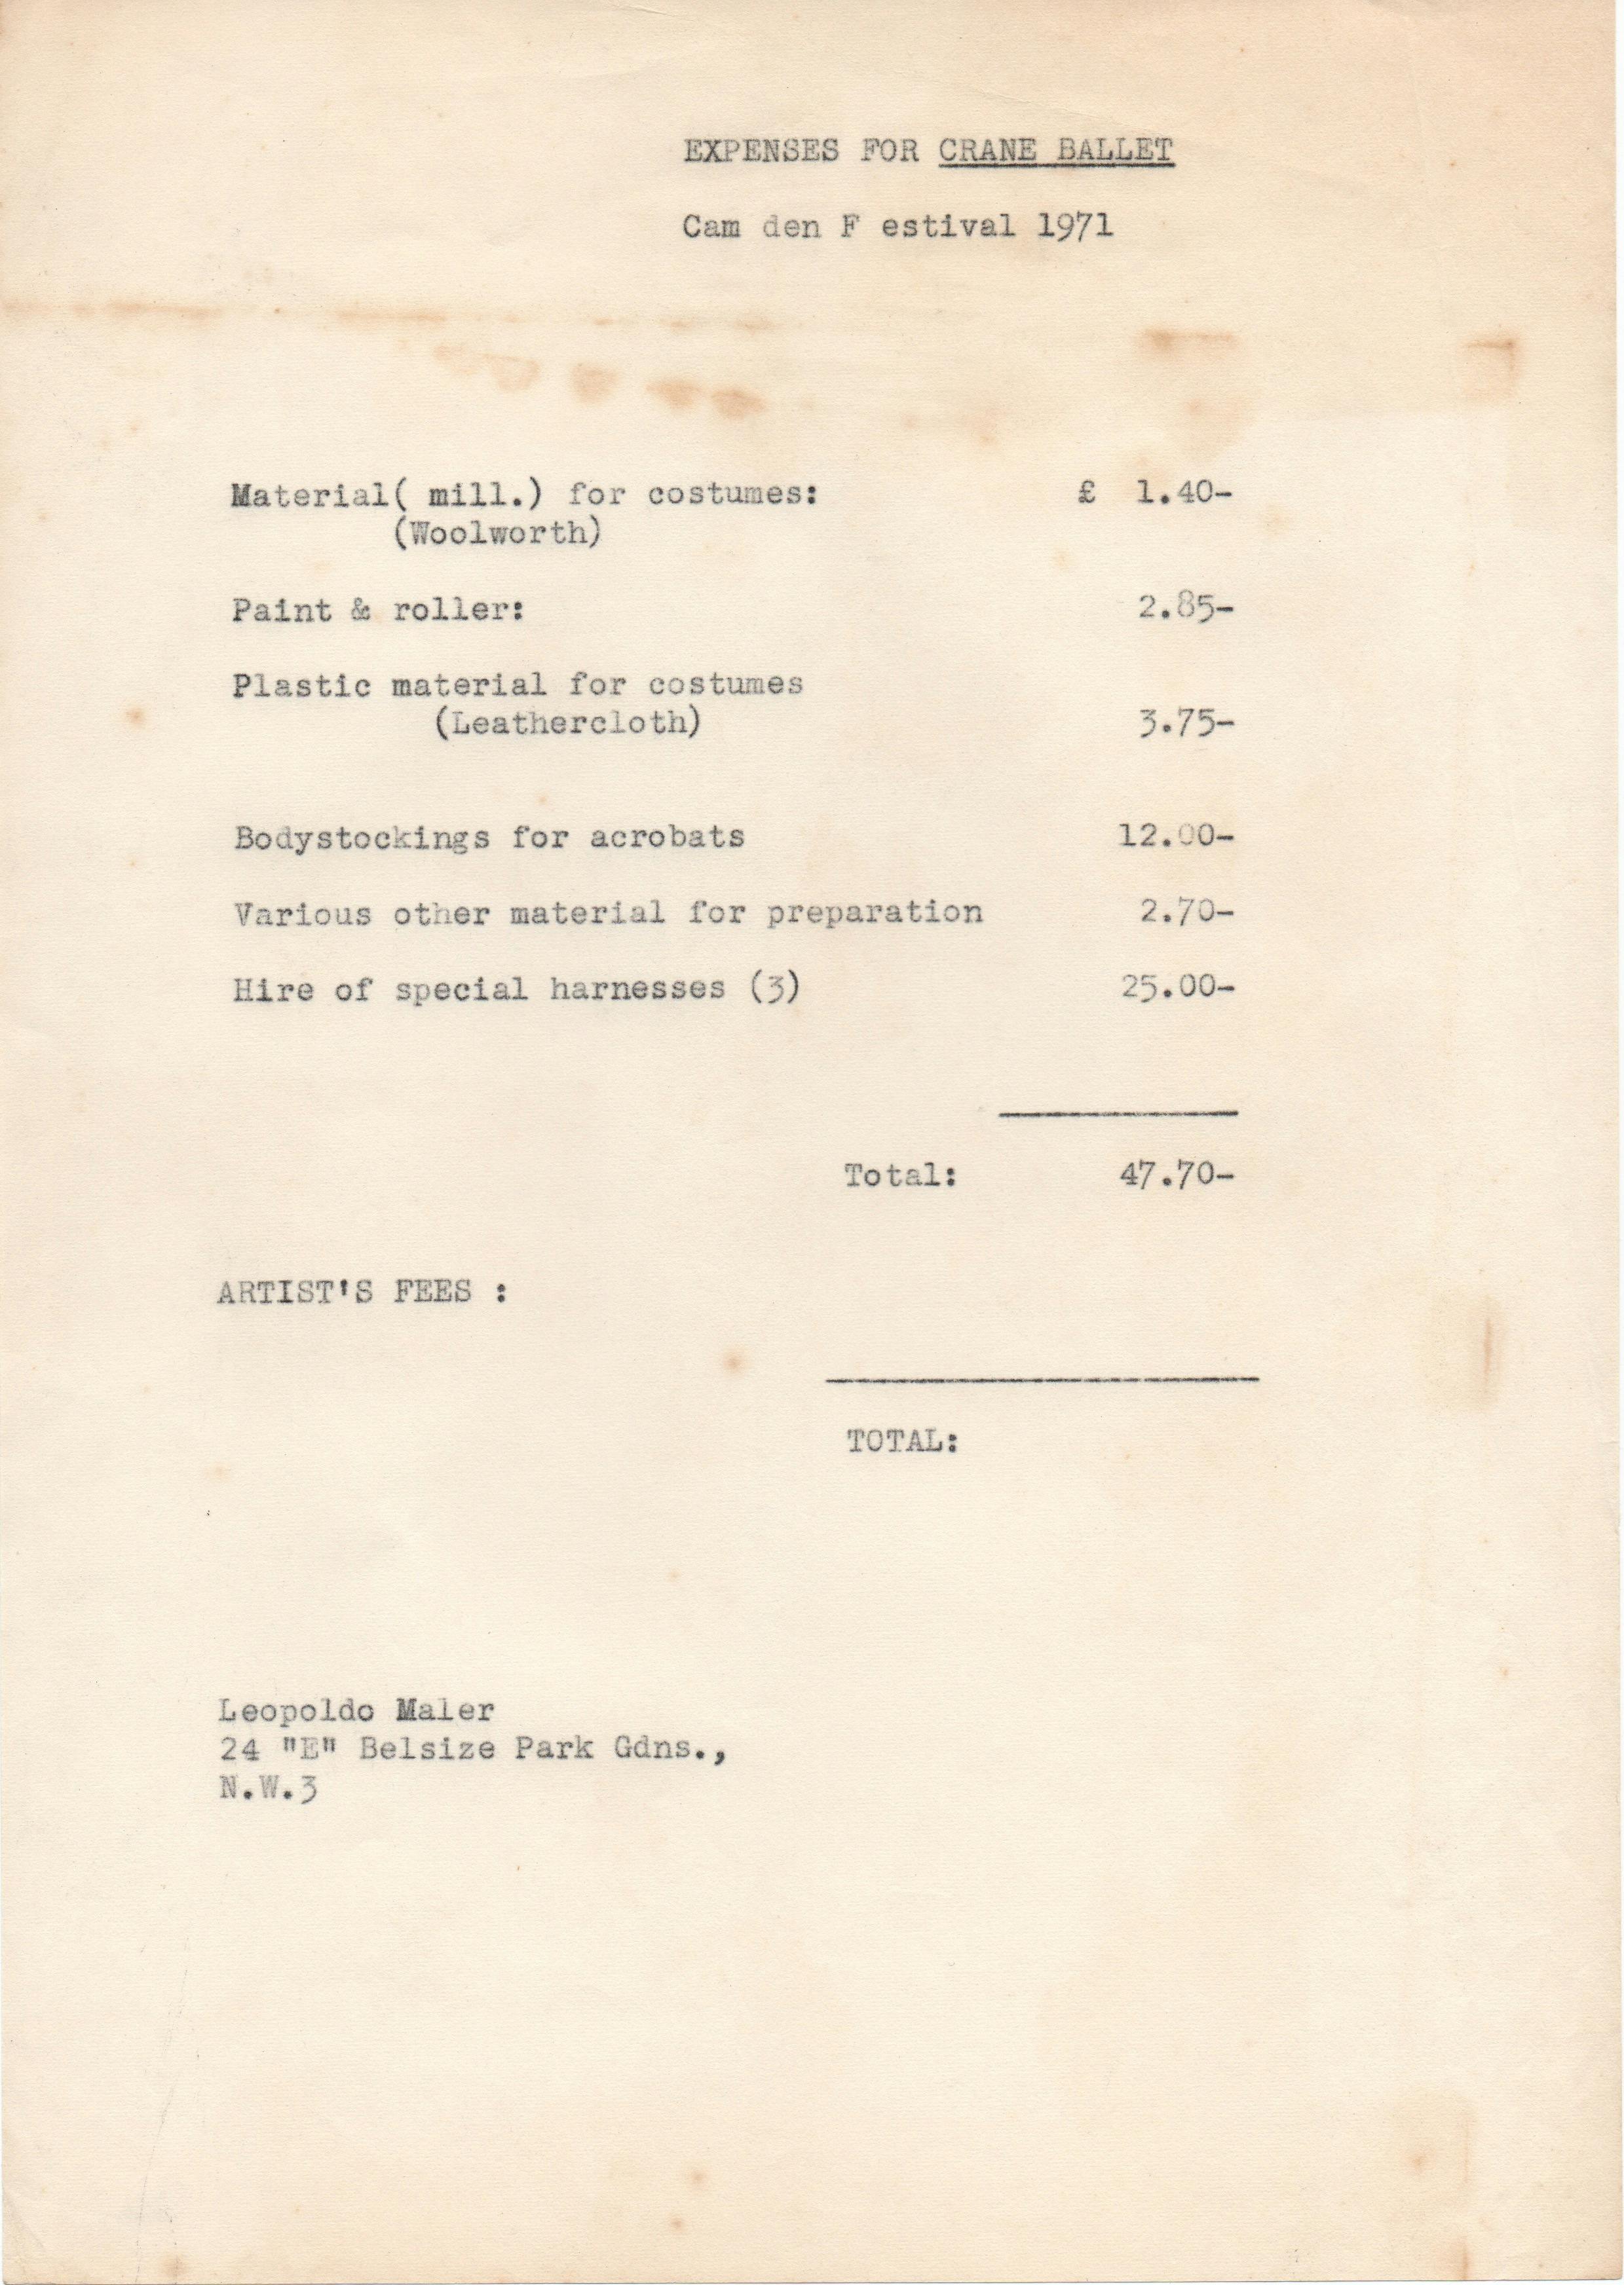 The image shows an aged sheet of typewritten paper. The page’s heading reads, “EXPENSES FOR CRANE BALLET: Camden Festival 1971.” The itemized account goes on to track expenses for the following: “Material (mill.) for costumes,” “Paint & rollers,” “Plastic material for costumes (Leathercloth),” “Bodystockings for acrobats,” “Various other material for preparation,” and “Hire of special harnesses (3),” respectively costing £1.40, £2.85, £3.75, £12.00, £2.70, and £25.00, for a subtotal of £47.70. Below this list, the itemized line “ARTIST’S FEES” and the additional total are blank. On the bottom left are the artist’s name and address: “Leopoldo Maler, 24 E Belsize Park Gdns., N.W.3.”